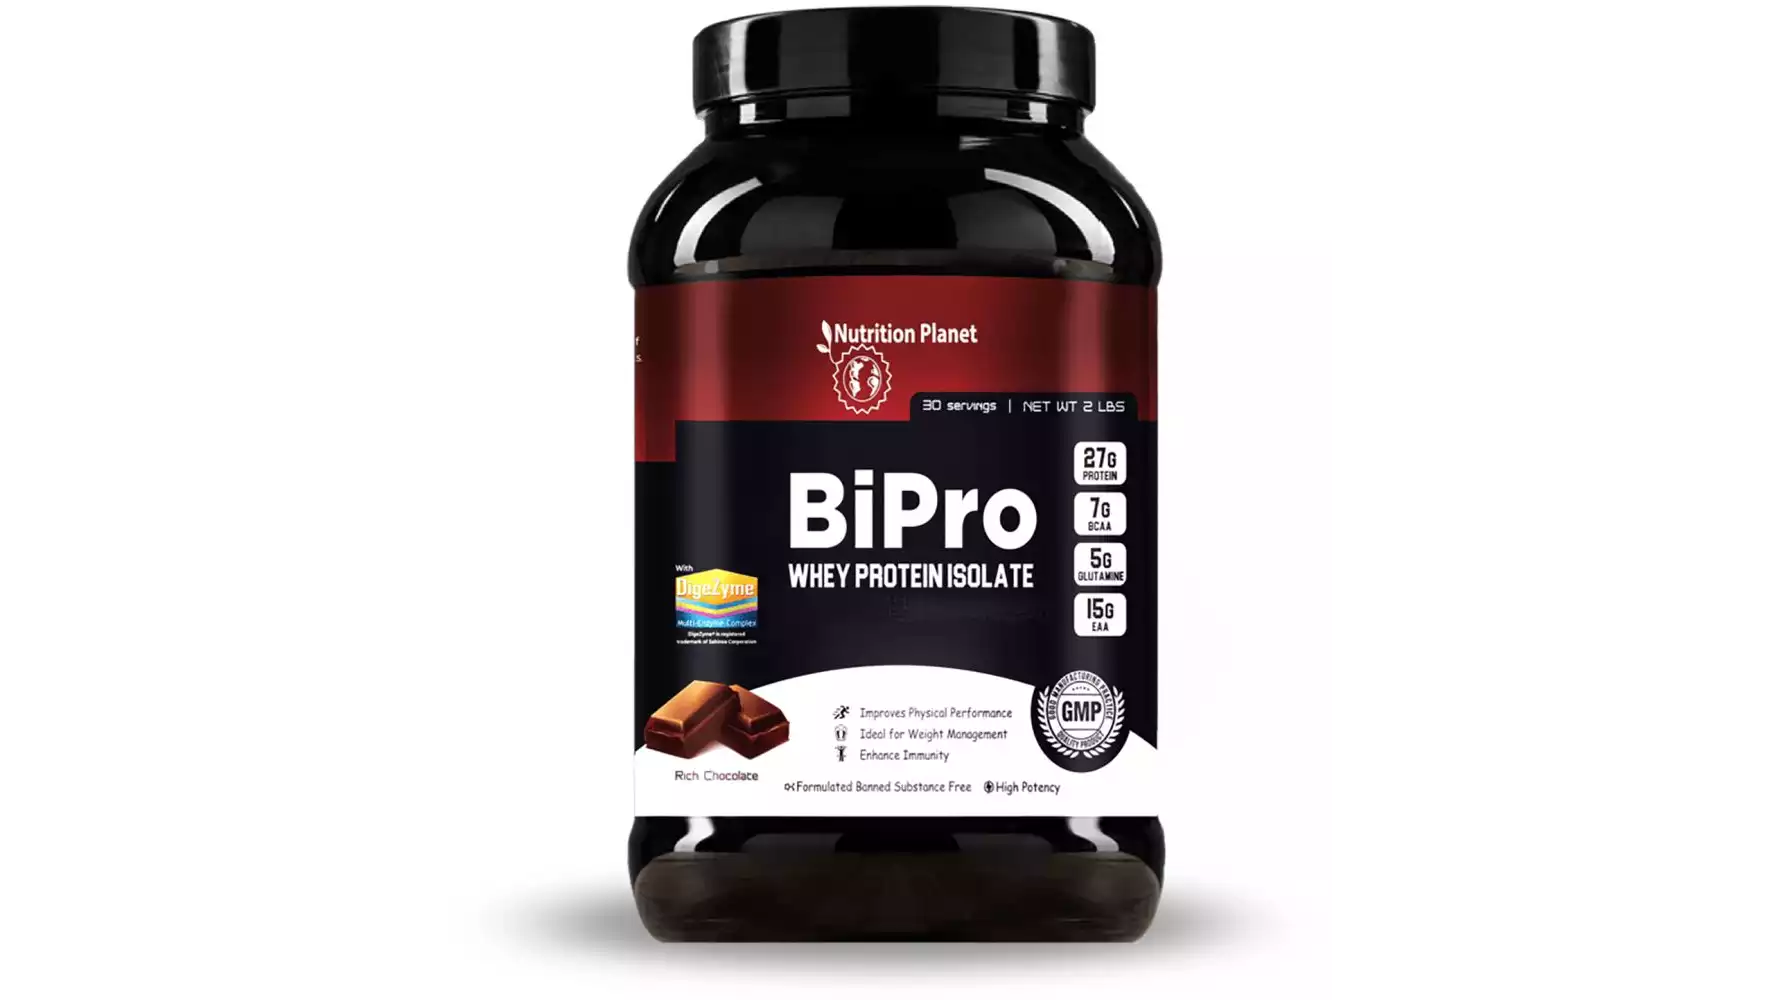 Nutrition Planet Bipro Whey Protein Isolate With Added Digezyme Chocolate (2lb)